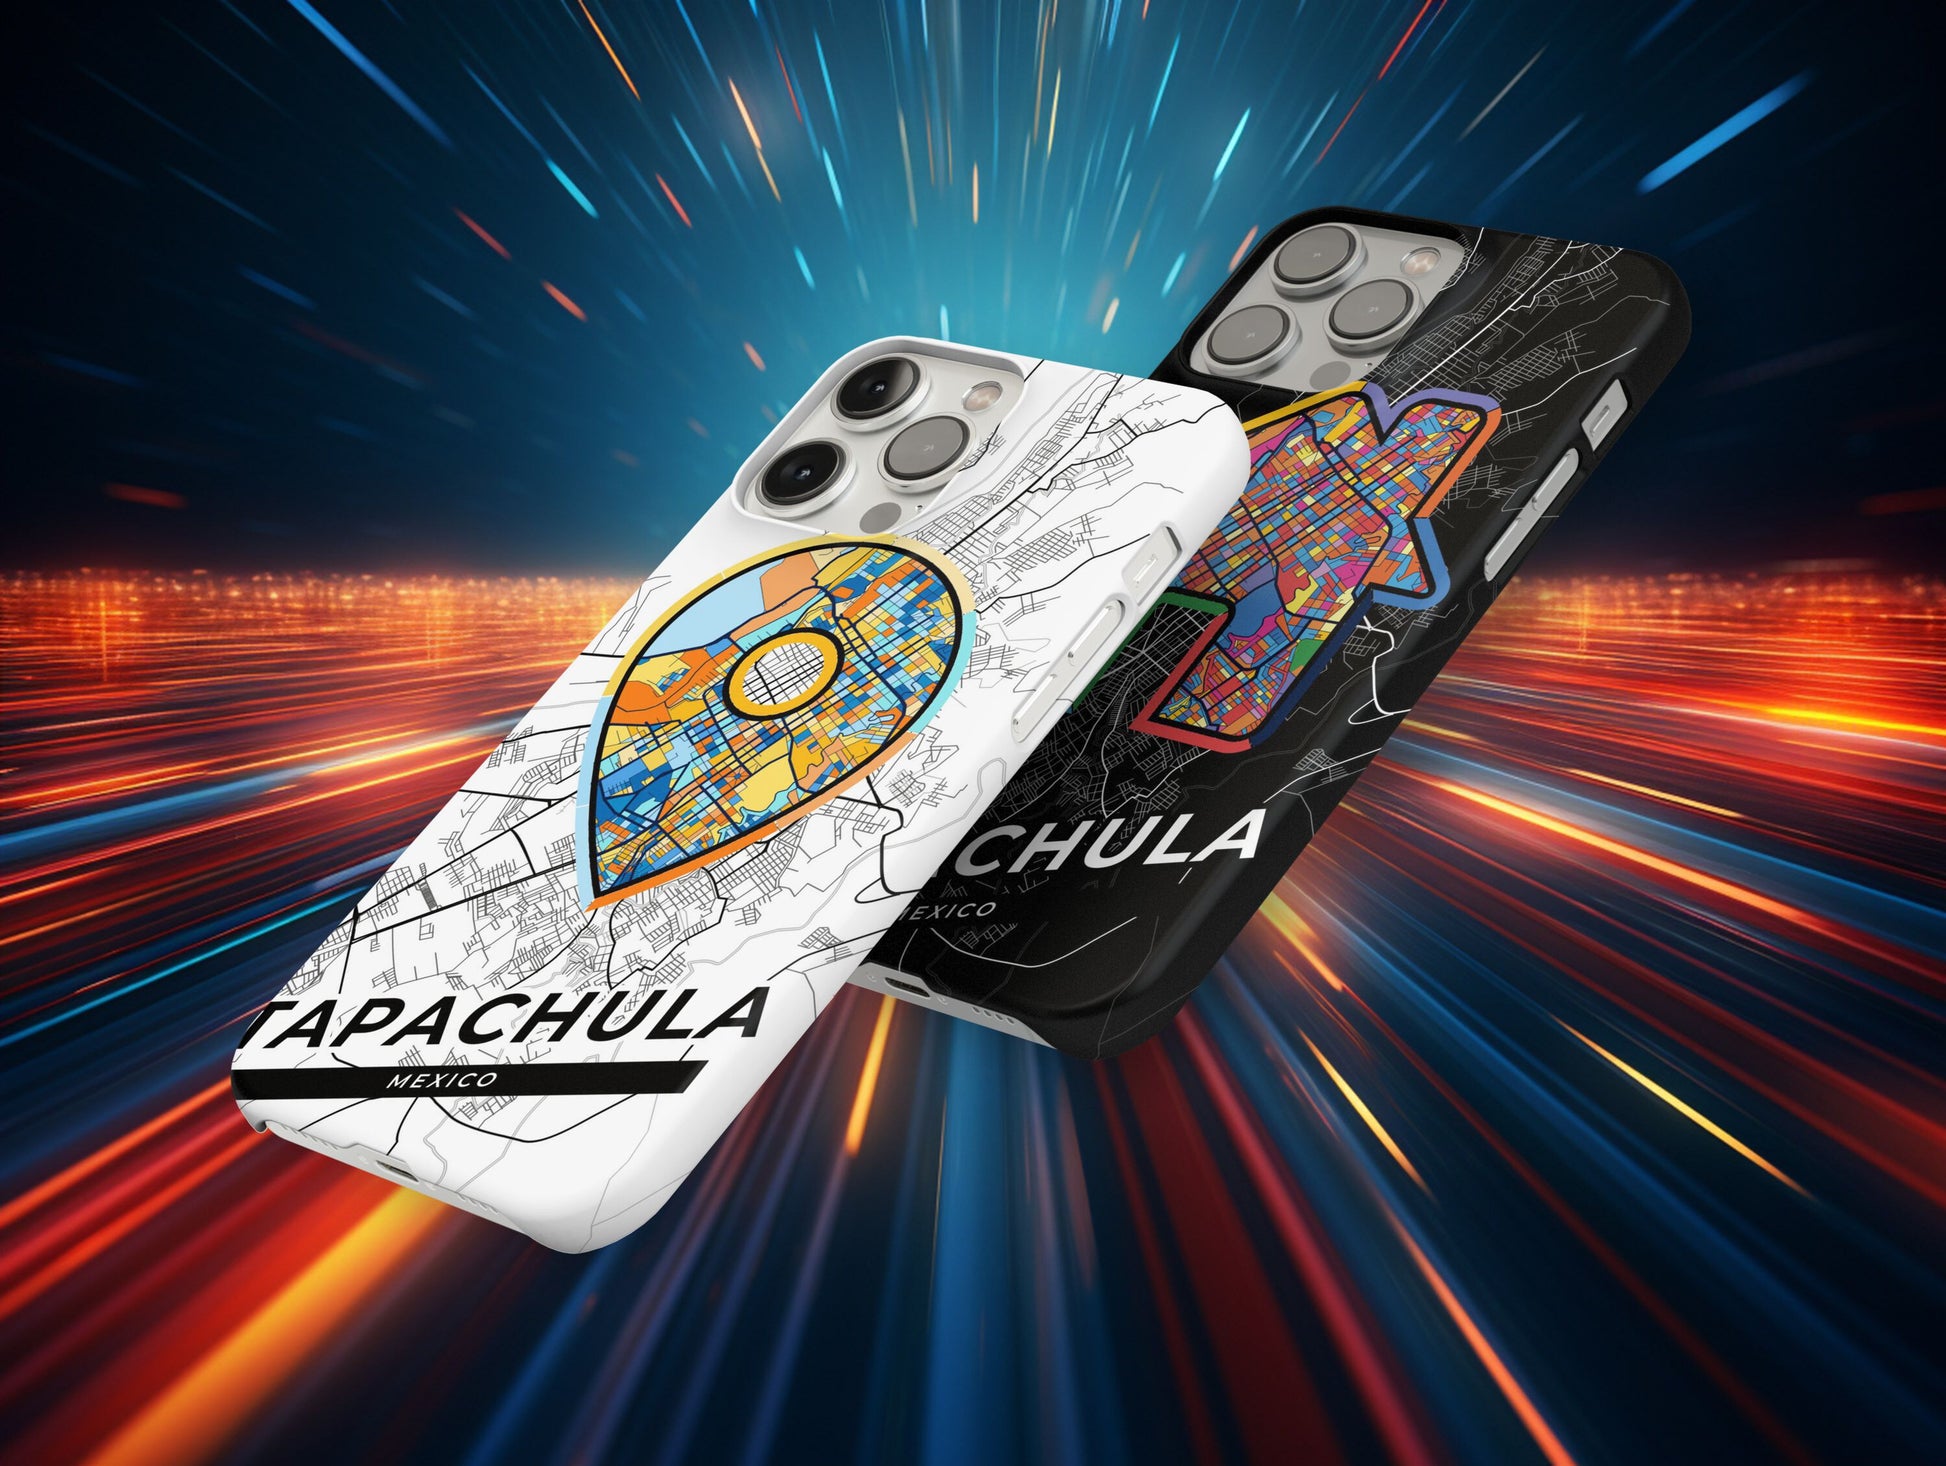 Tapachula Mexico slim phone case with colorful icon